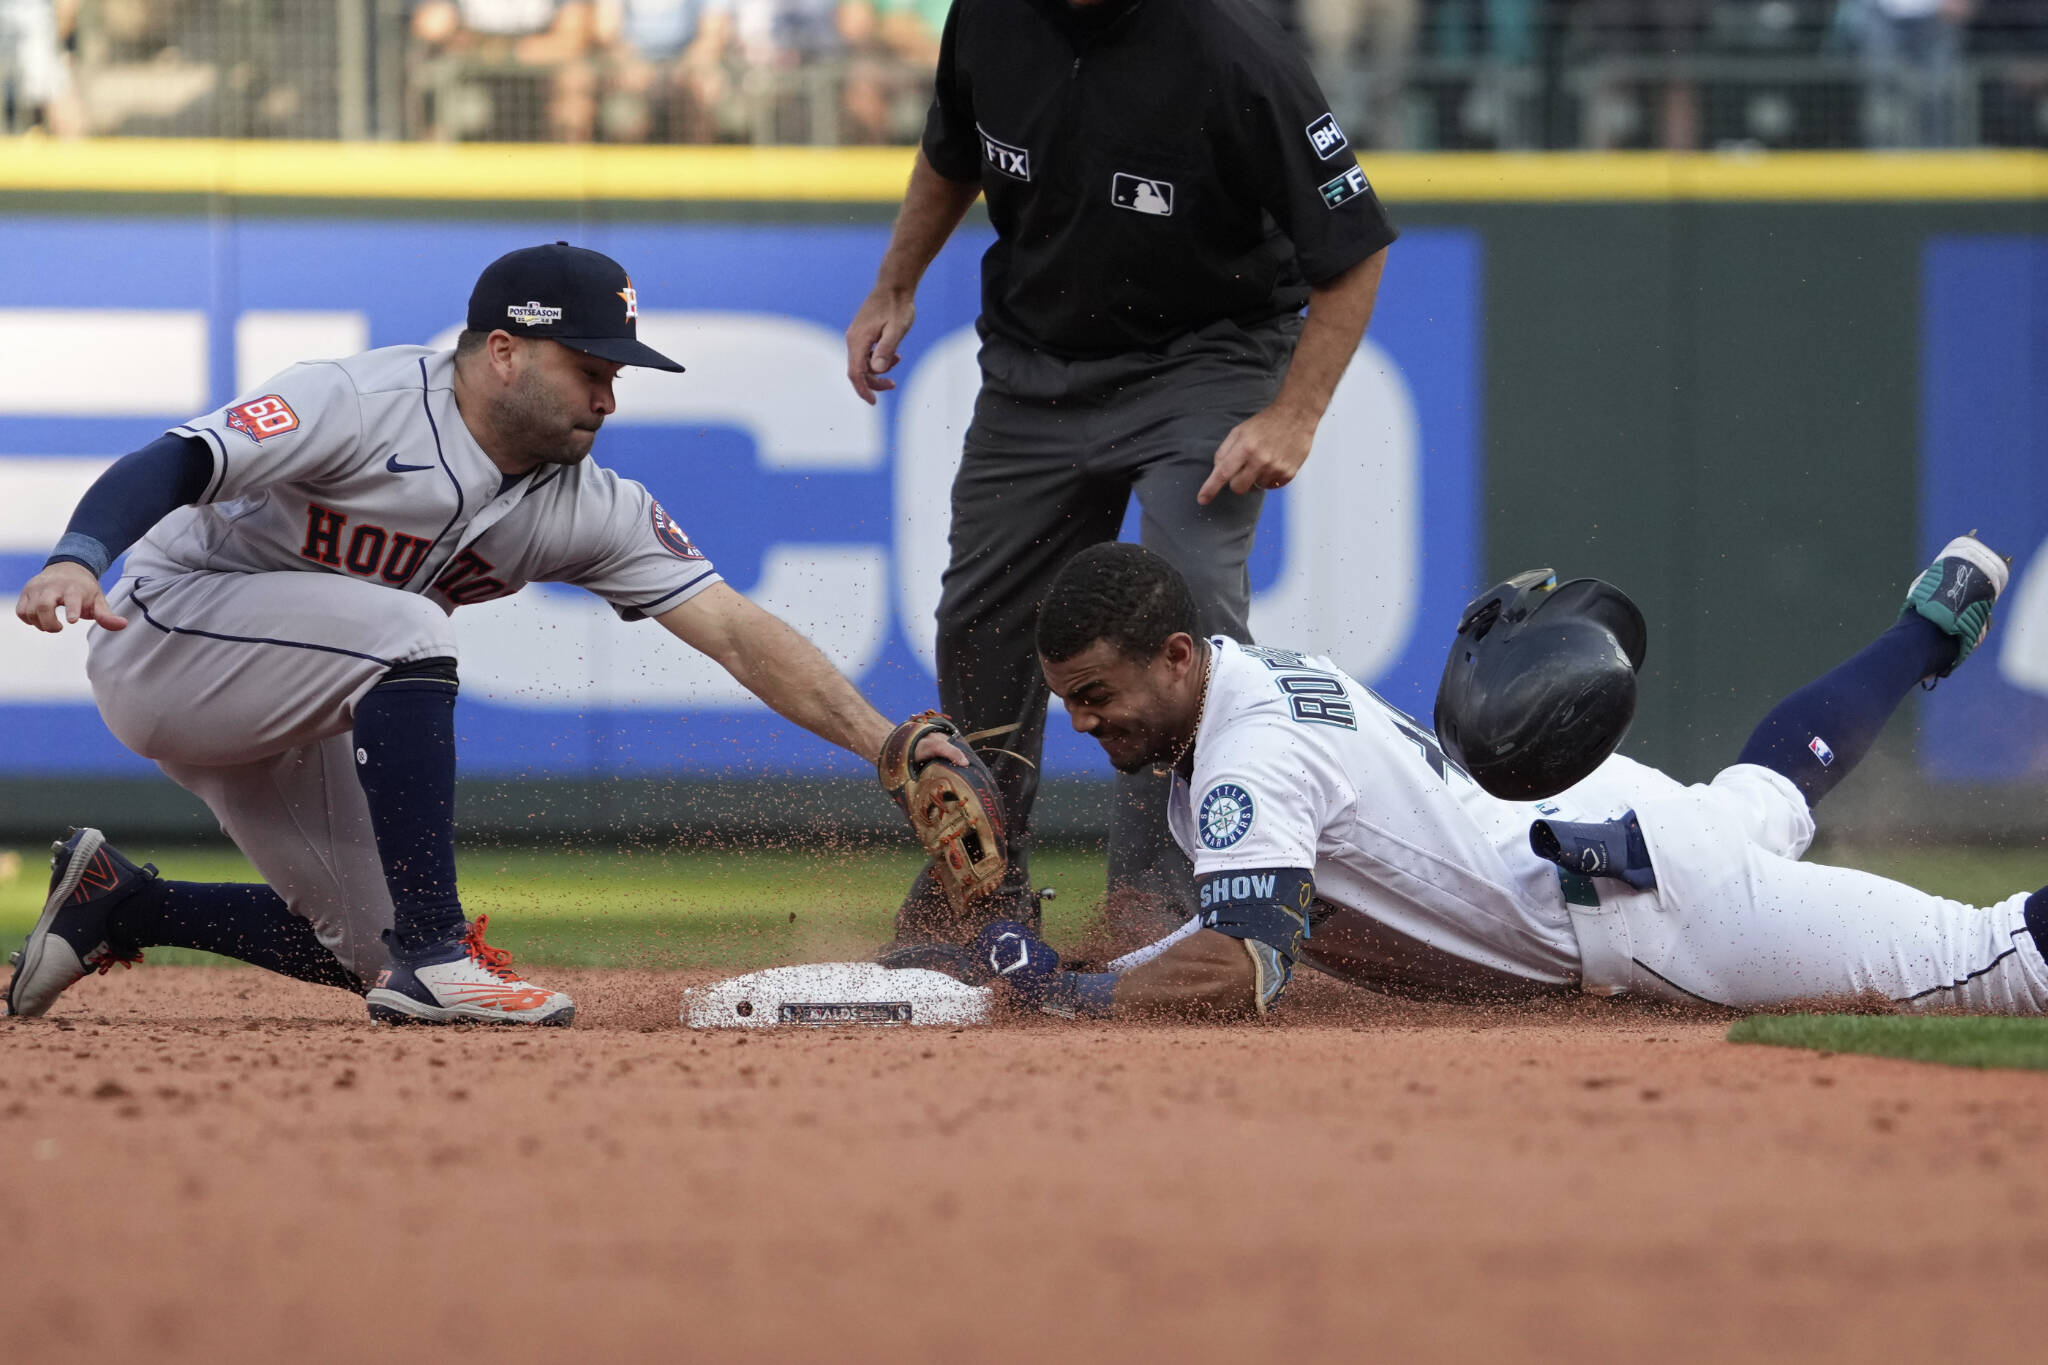 The Mariners’ Julio Rodriguez (44) slides safely into second base for a double under Astros second baseman Jose Altuve during the eighth inning in Game 3 of an American League Division Series playoff game on Oct. 15 in Seattle. (AP Photo/Ted S. Warren)